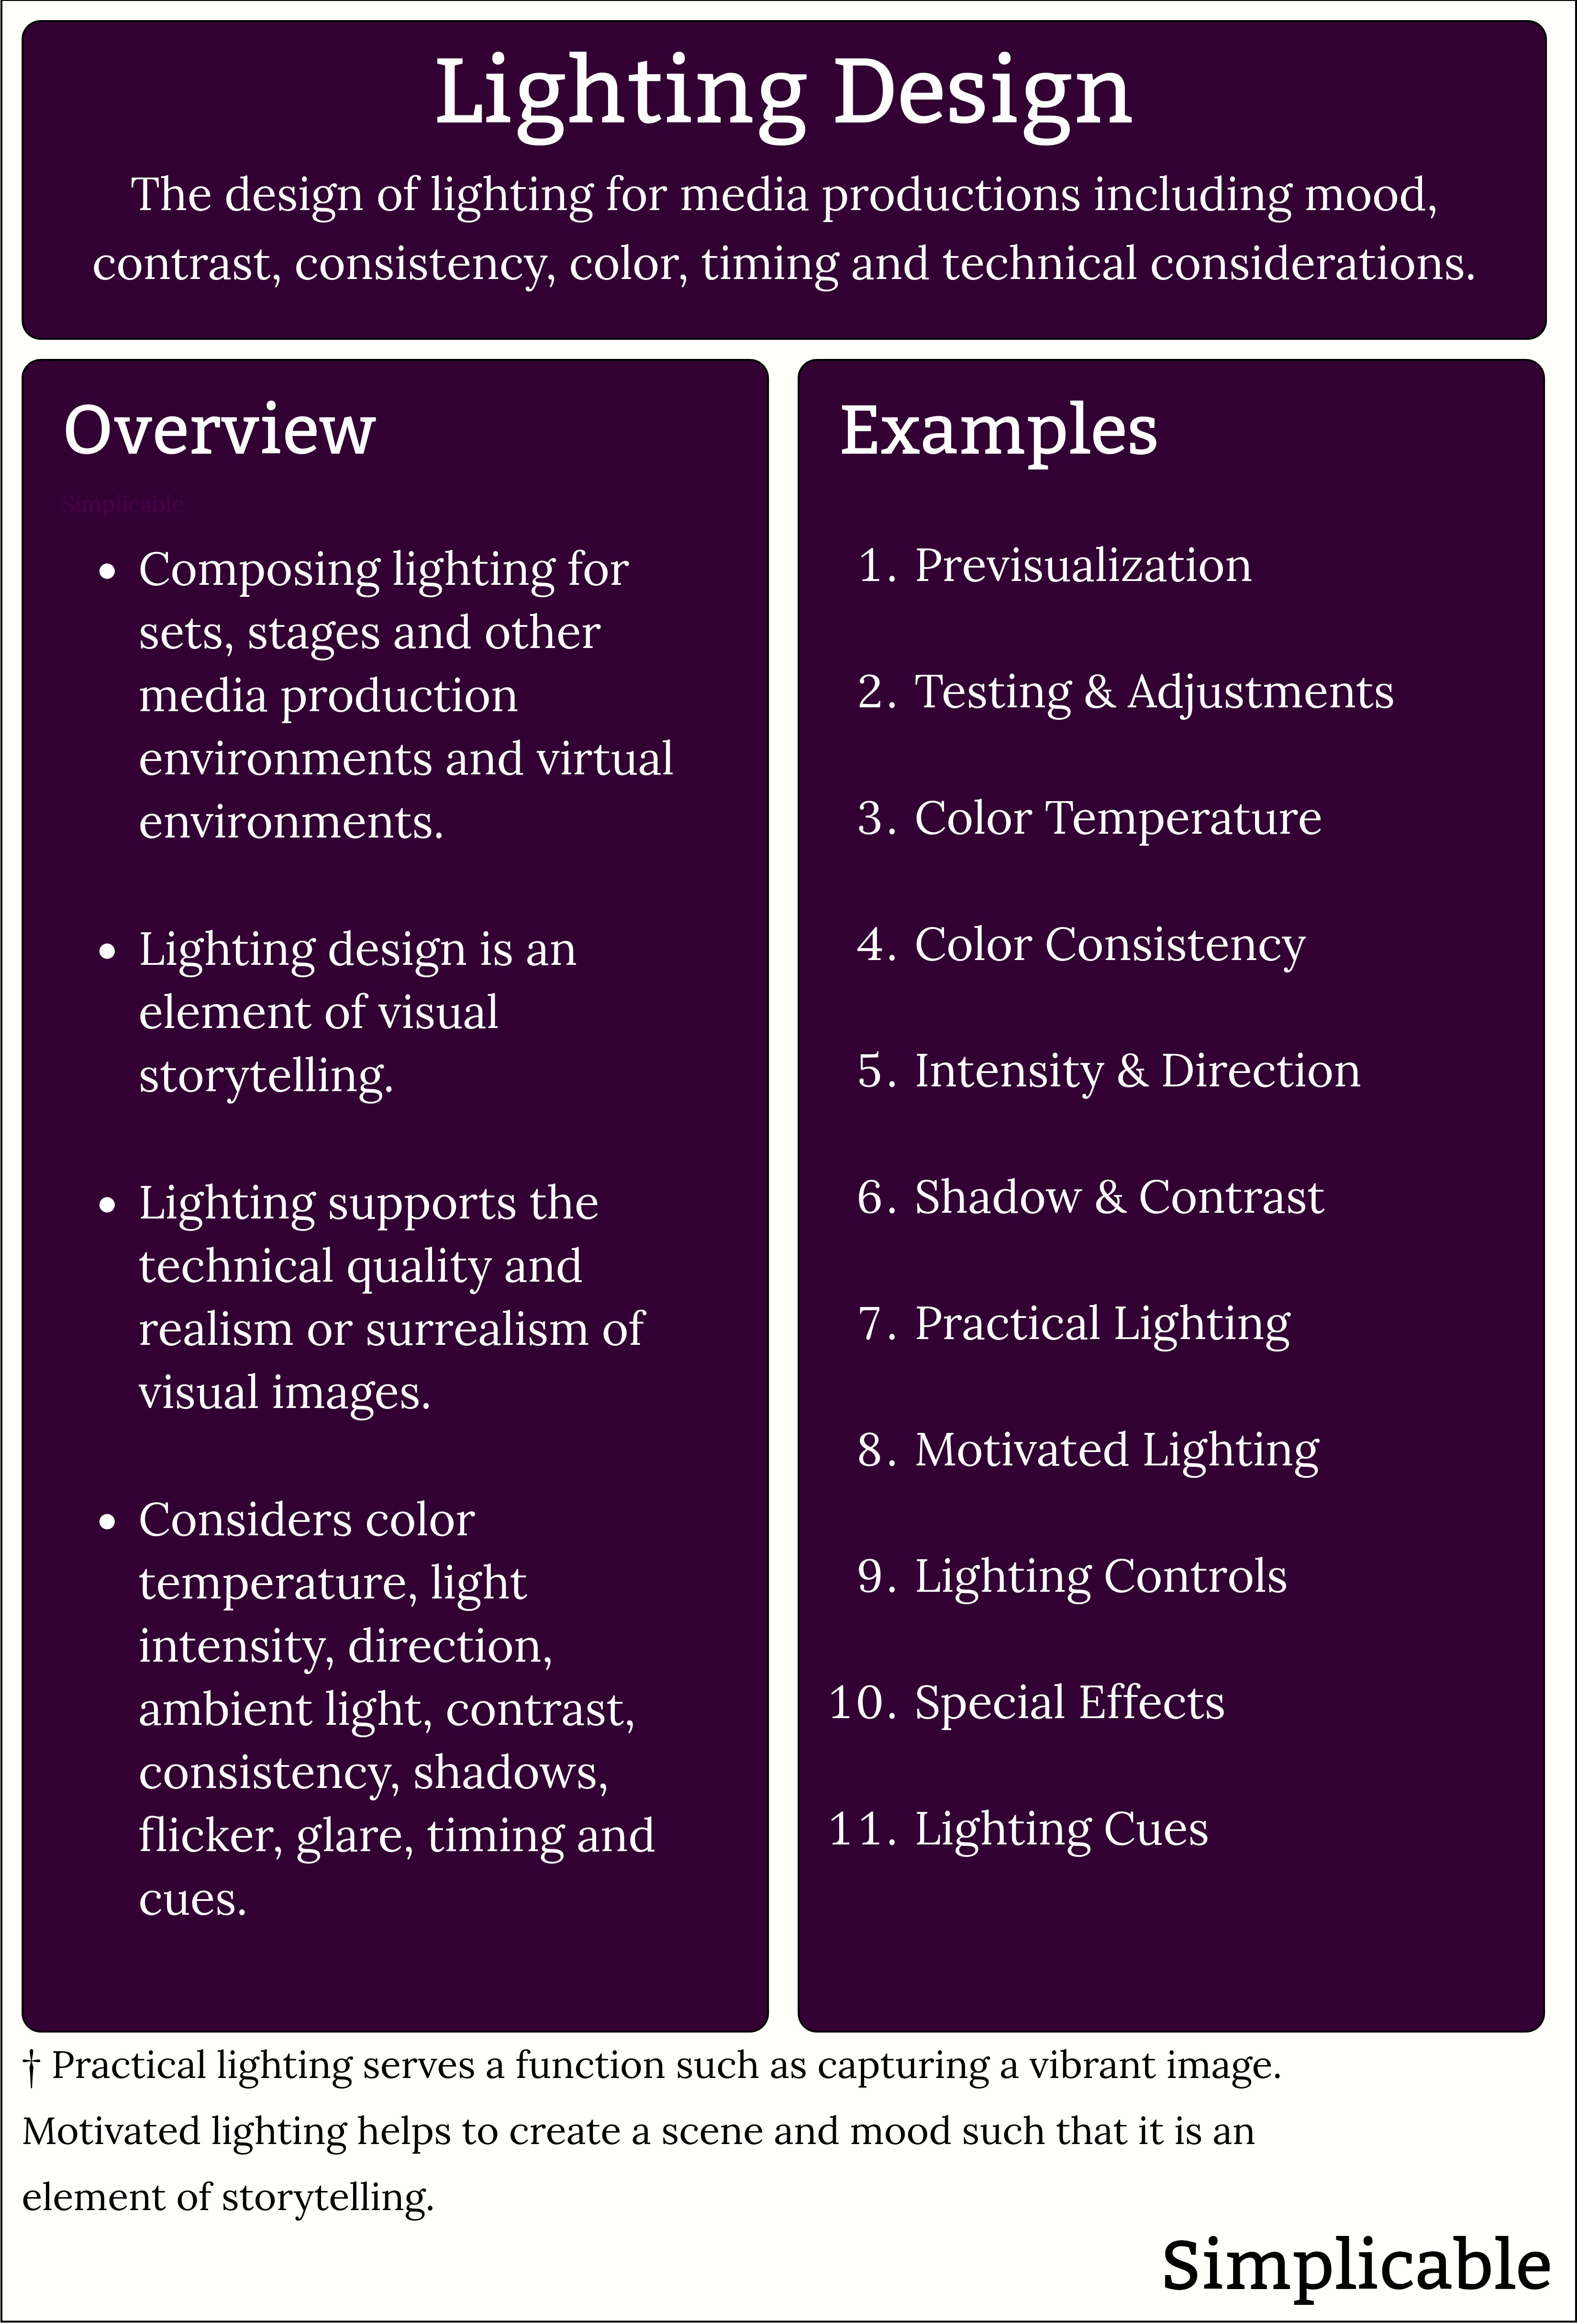 lighting design overview and examples